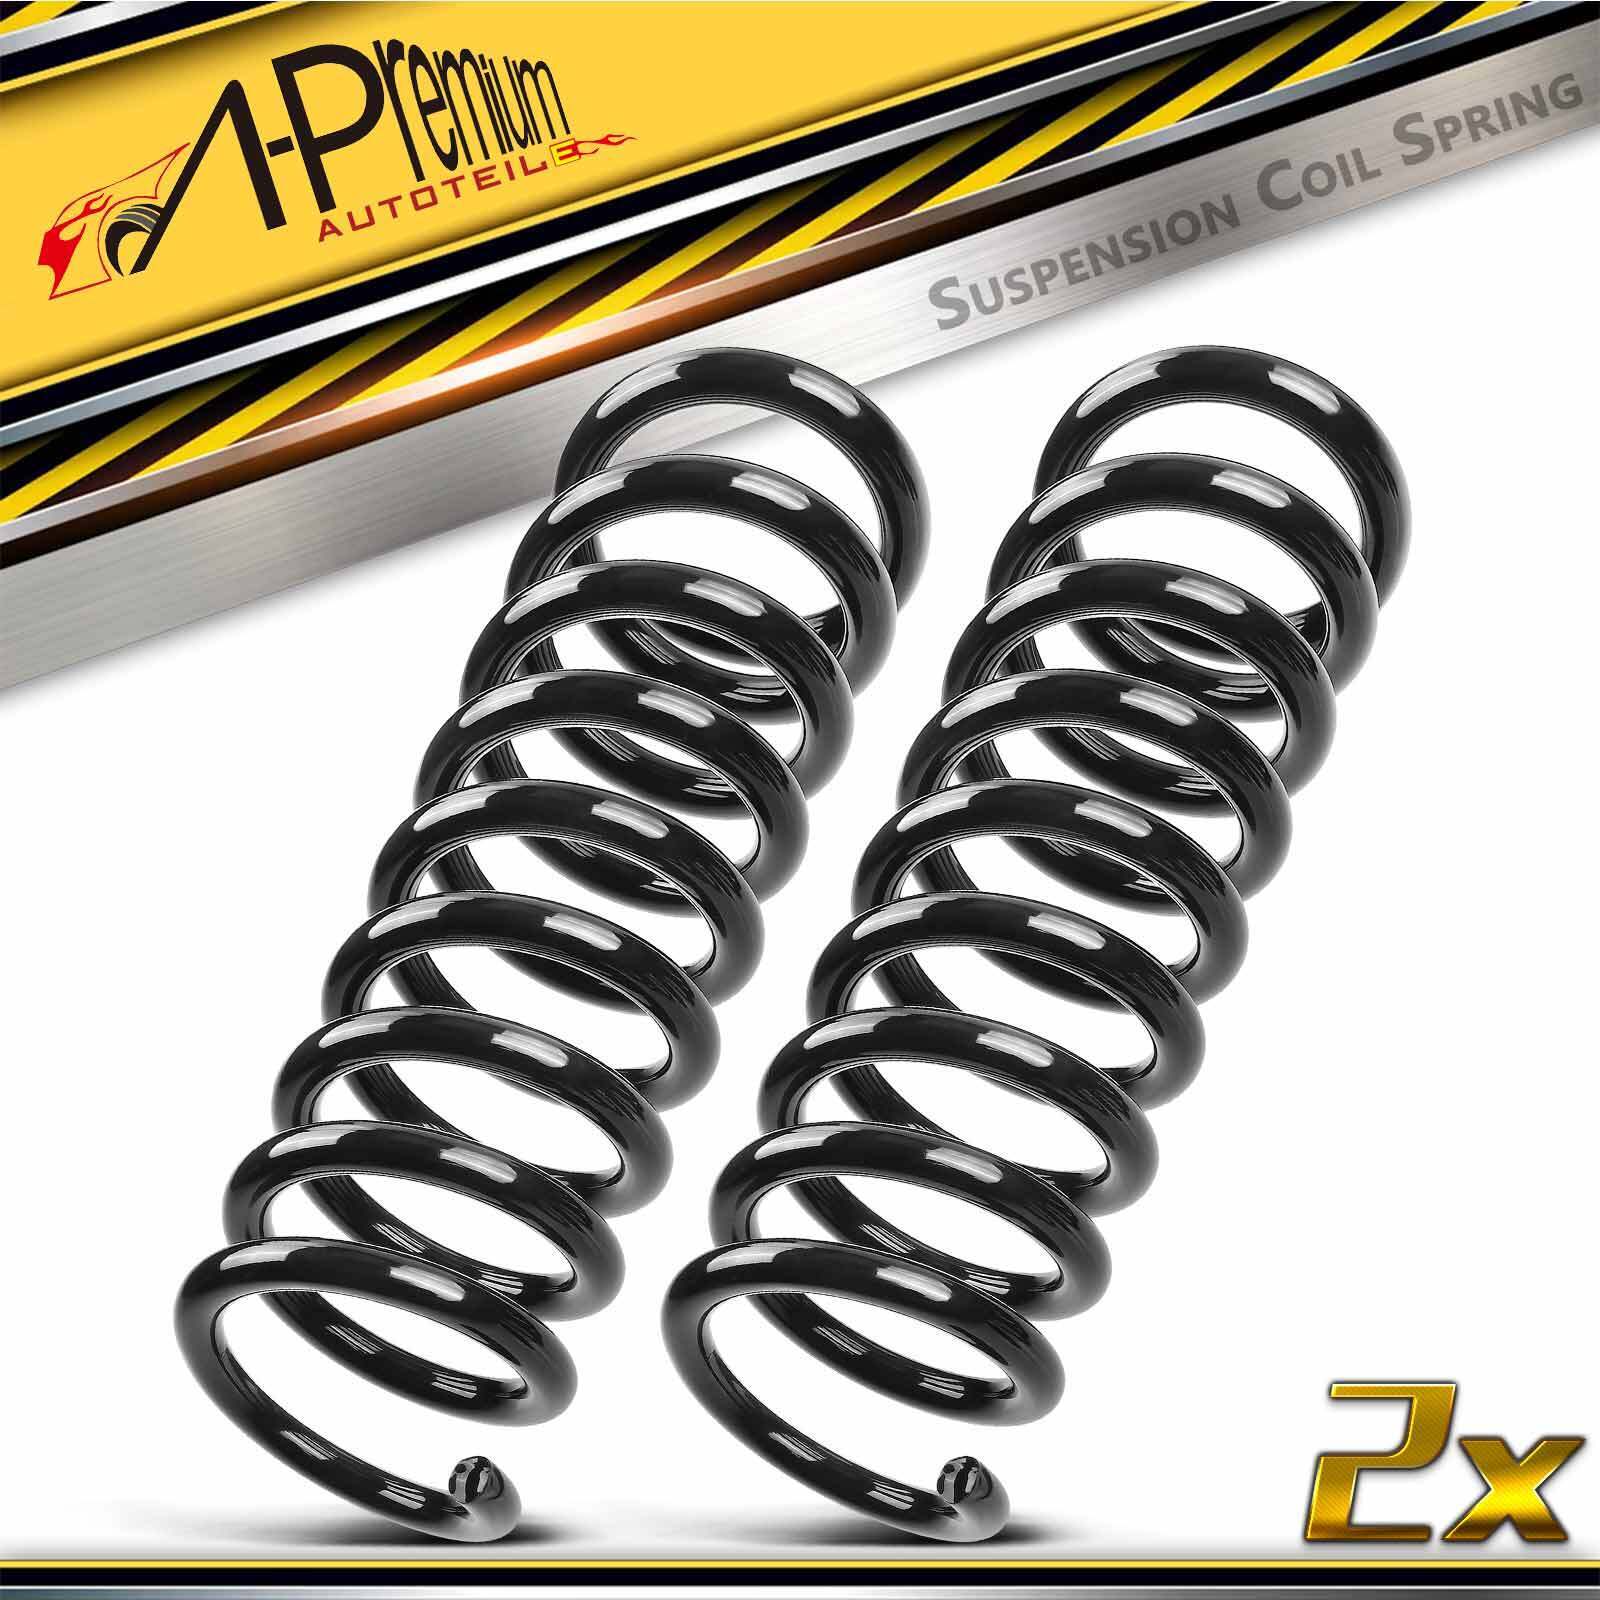 2x Coil Springs Front LH & RH for Ford Fairmont Mustang Mercury Capri Marquis